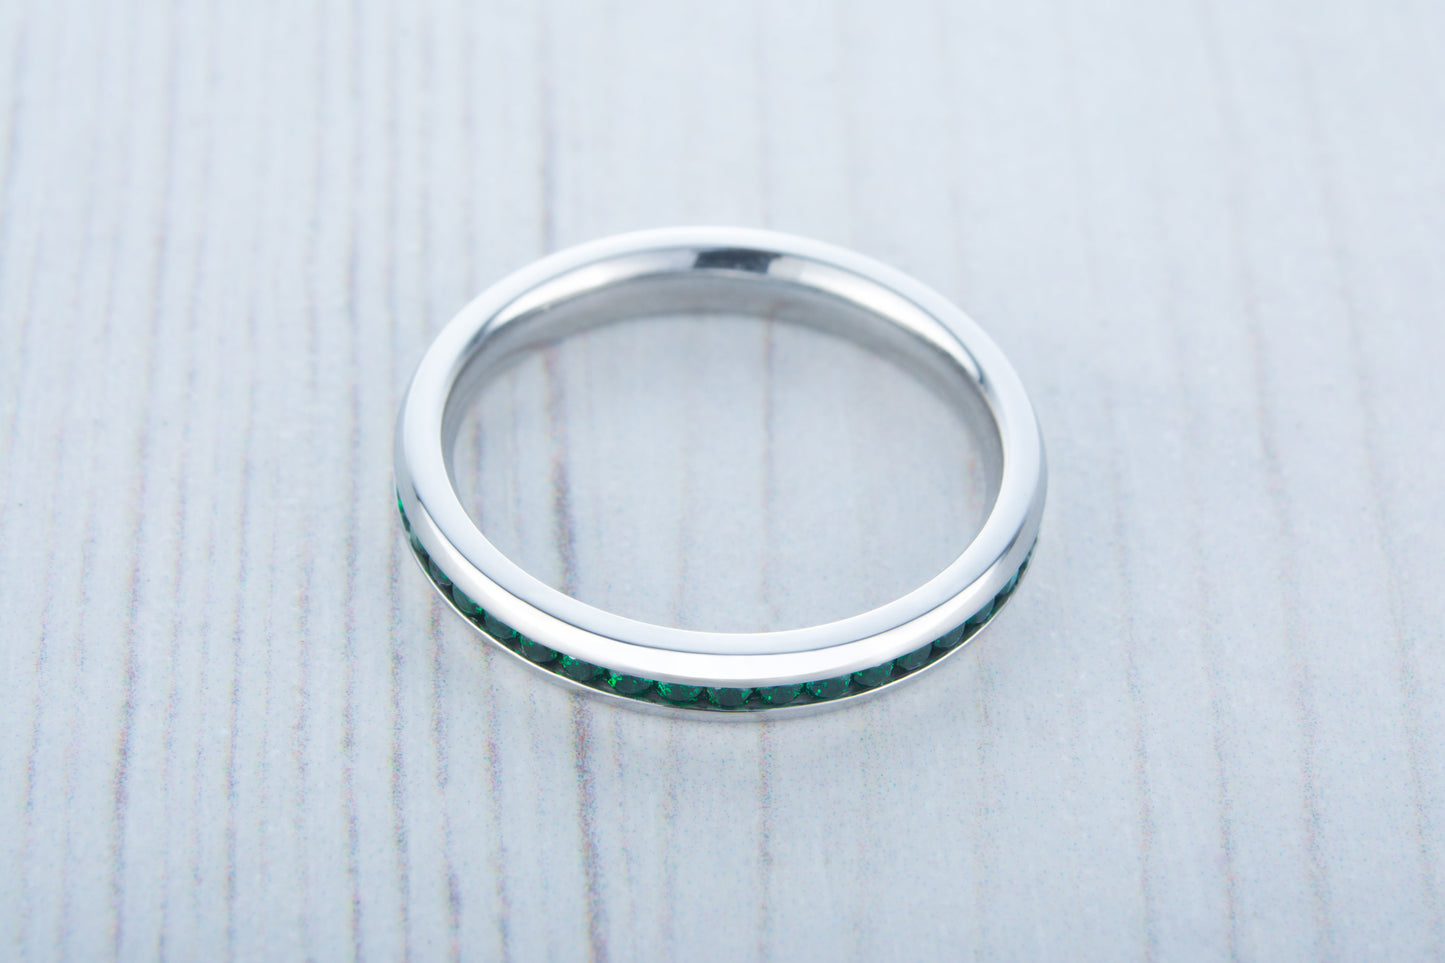 Lab Emerald 3mm Wide Full Eternity ring / stacking ring in white gold or titanium - Wedding Band - Engagement ring